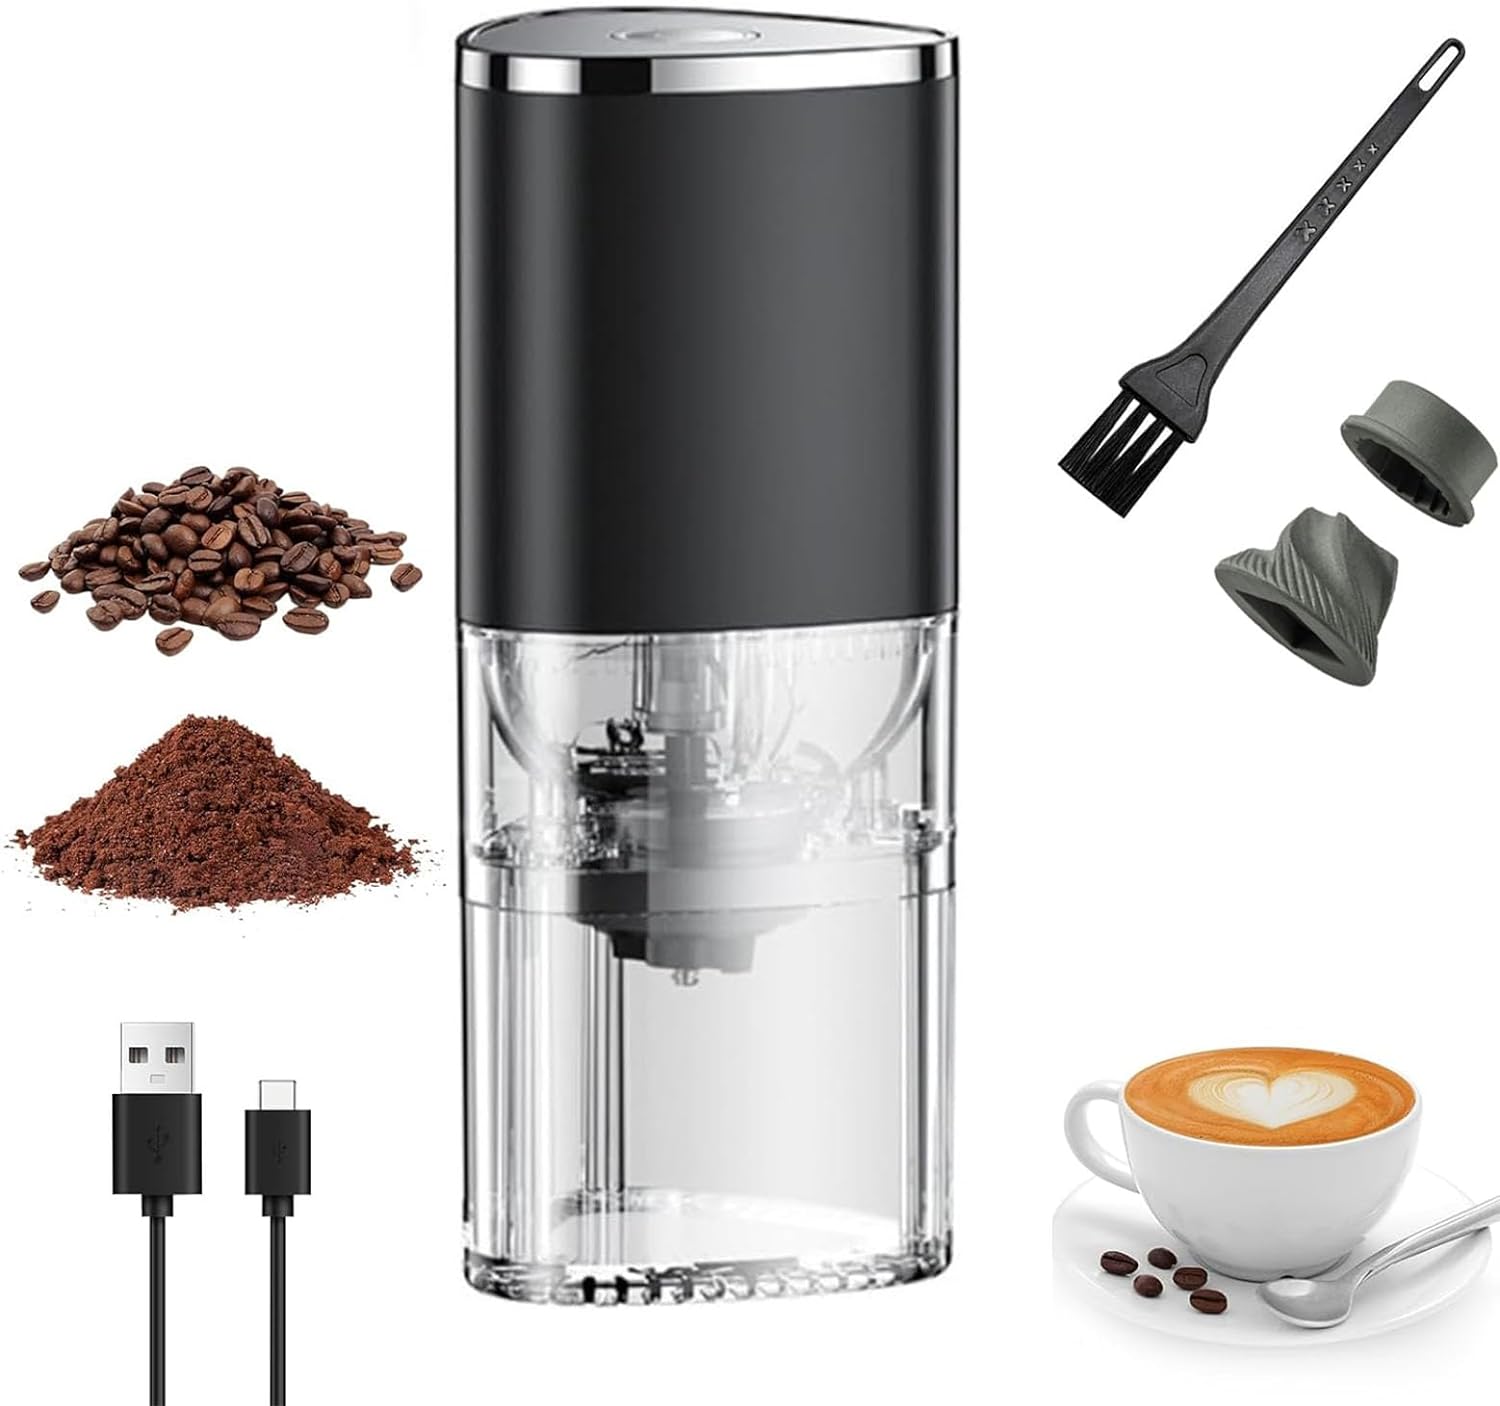 Portable Electric Coffee Grinder: Adjustable Grinder for Espresso & Beans, Ceramic Core, Type-C Charging, 30g Capacity for Home & Travel